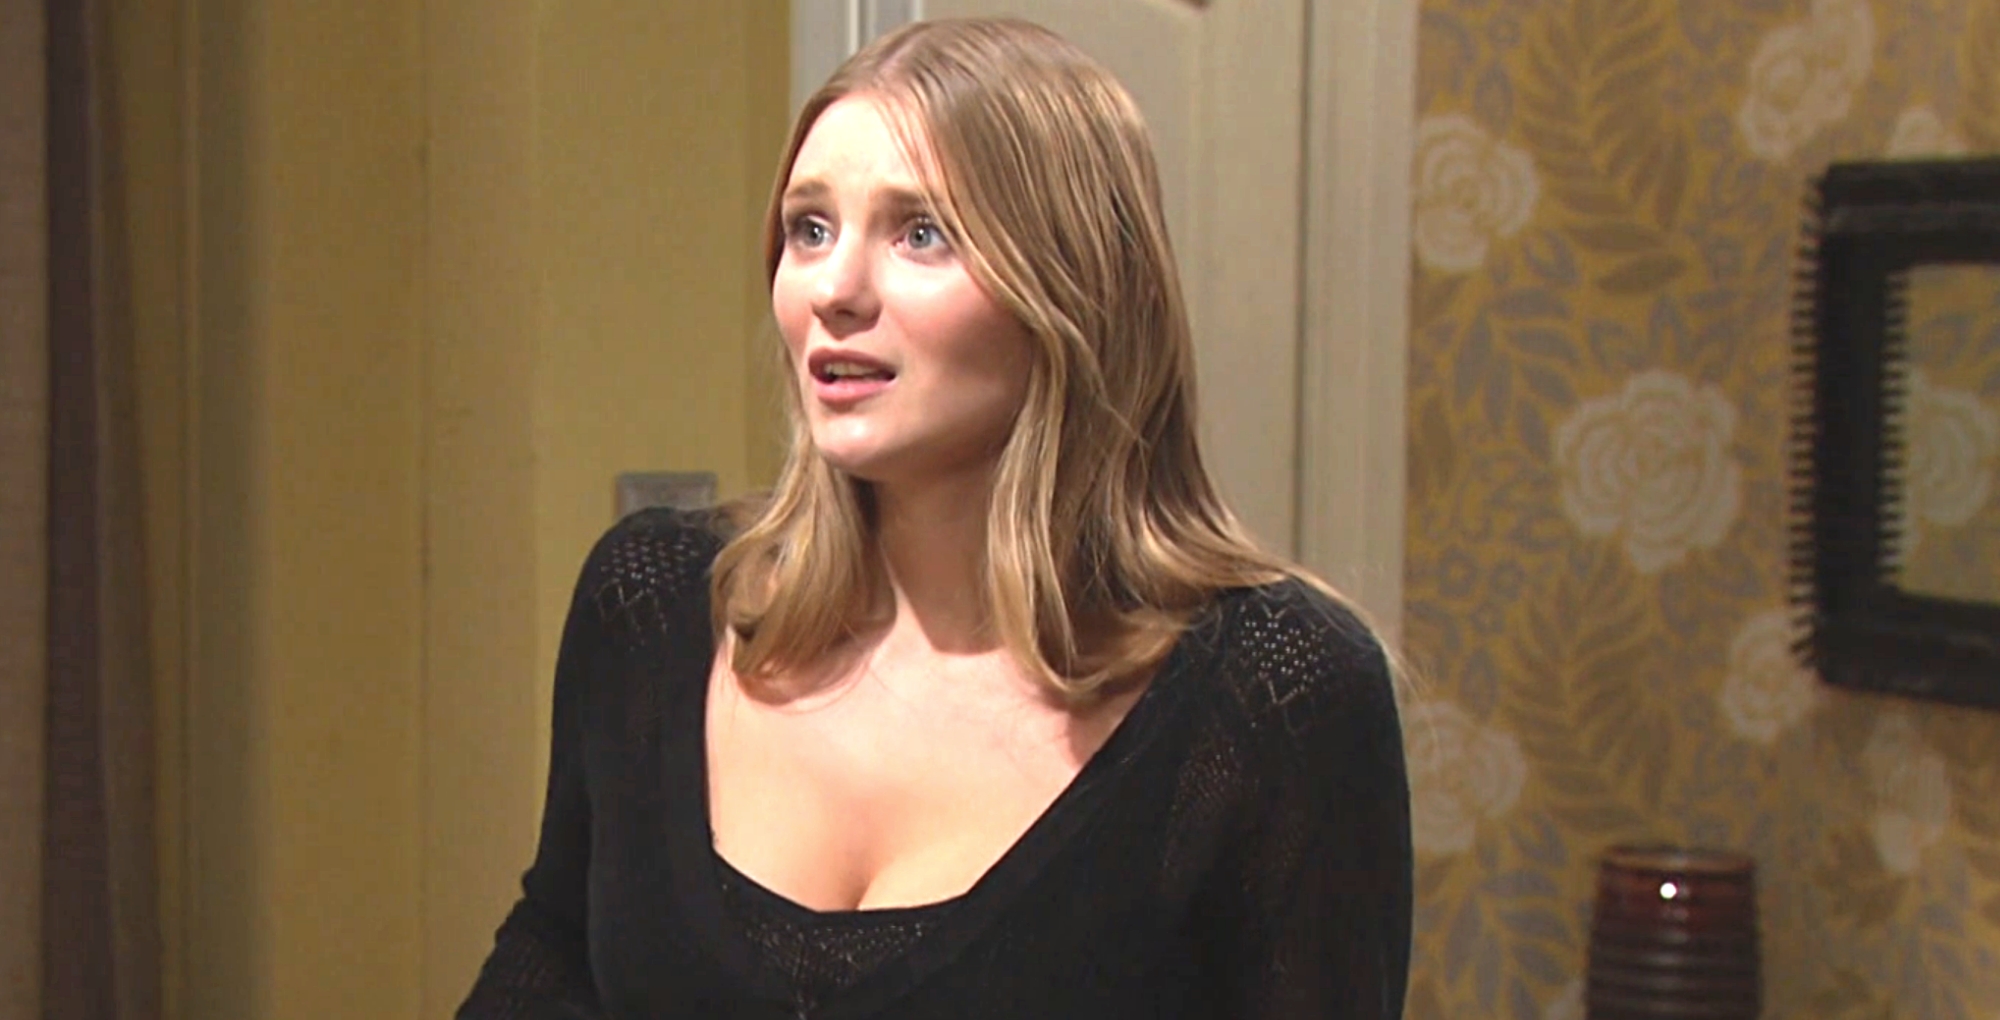 days of our lives recap for friday, february 10, 2023 a shocked allie horton decries chanel's inconvenient arrival.